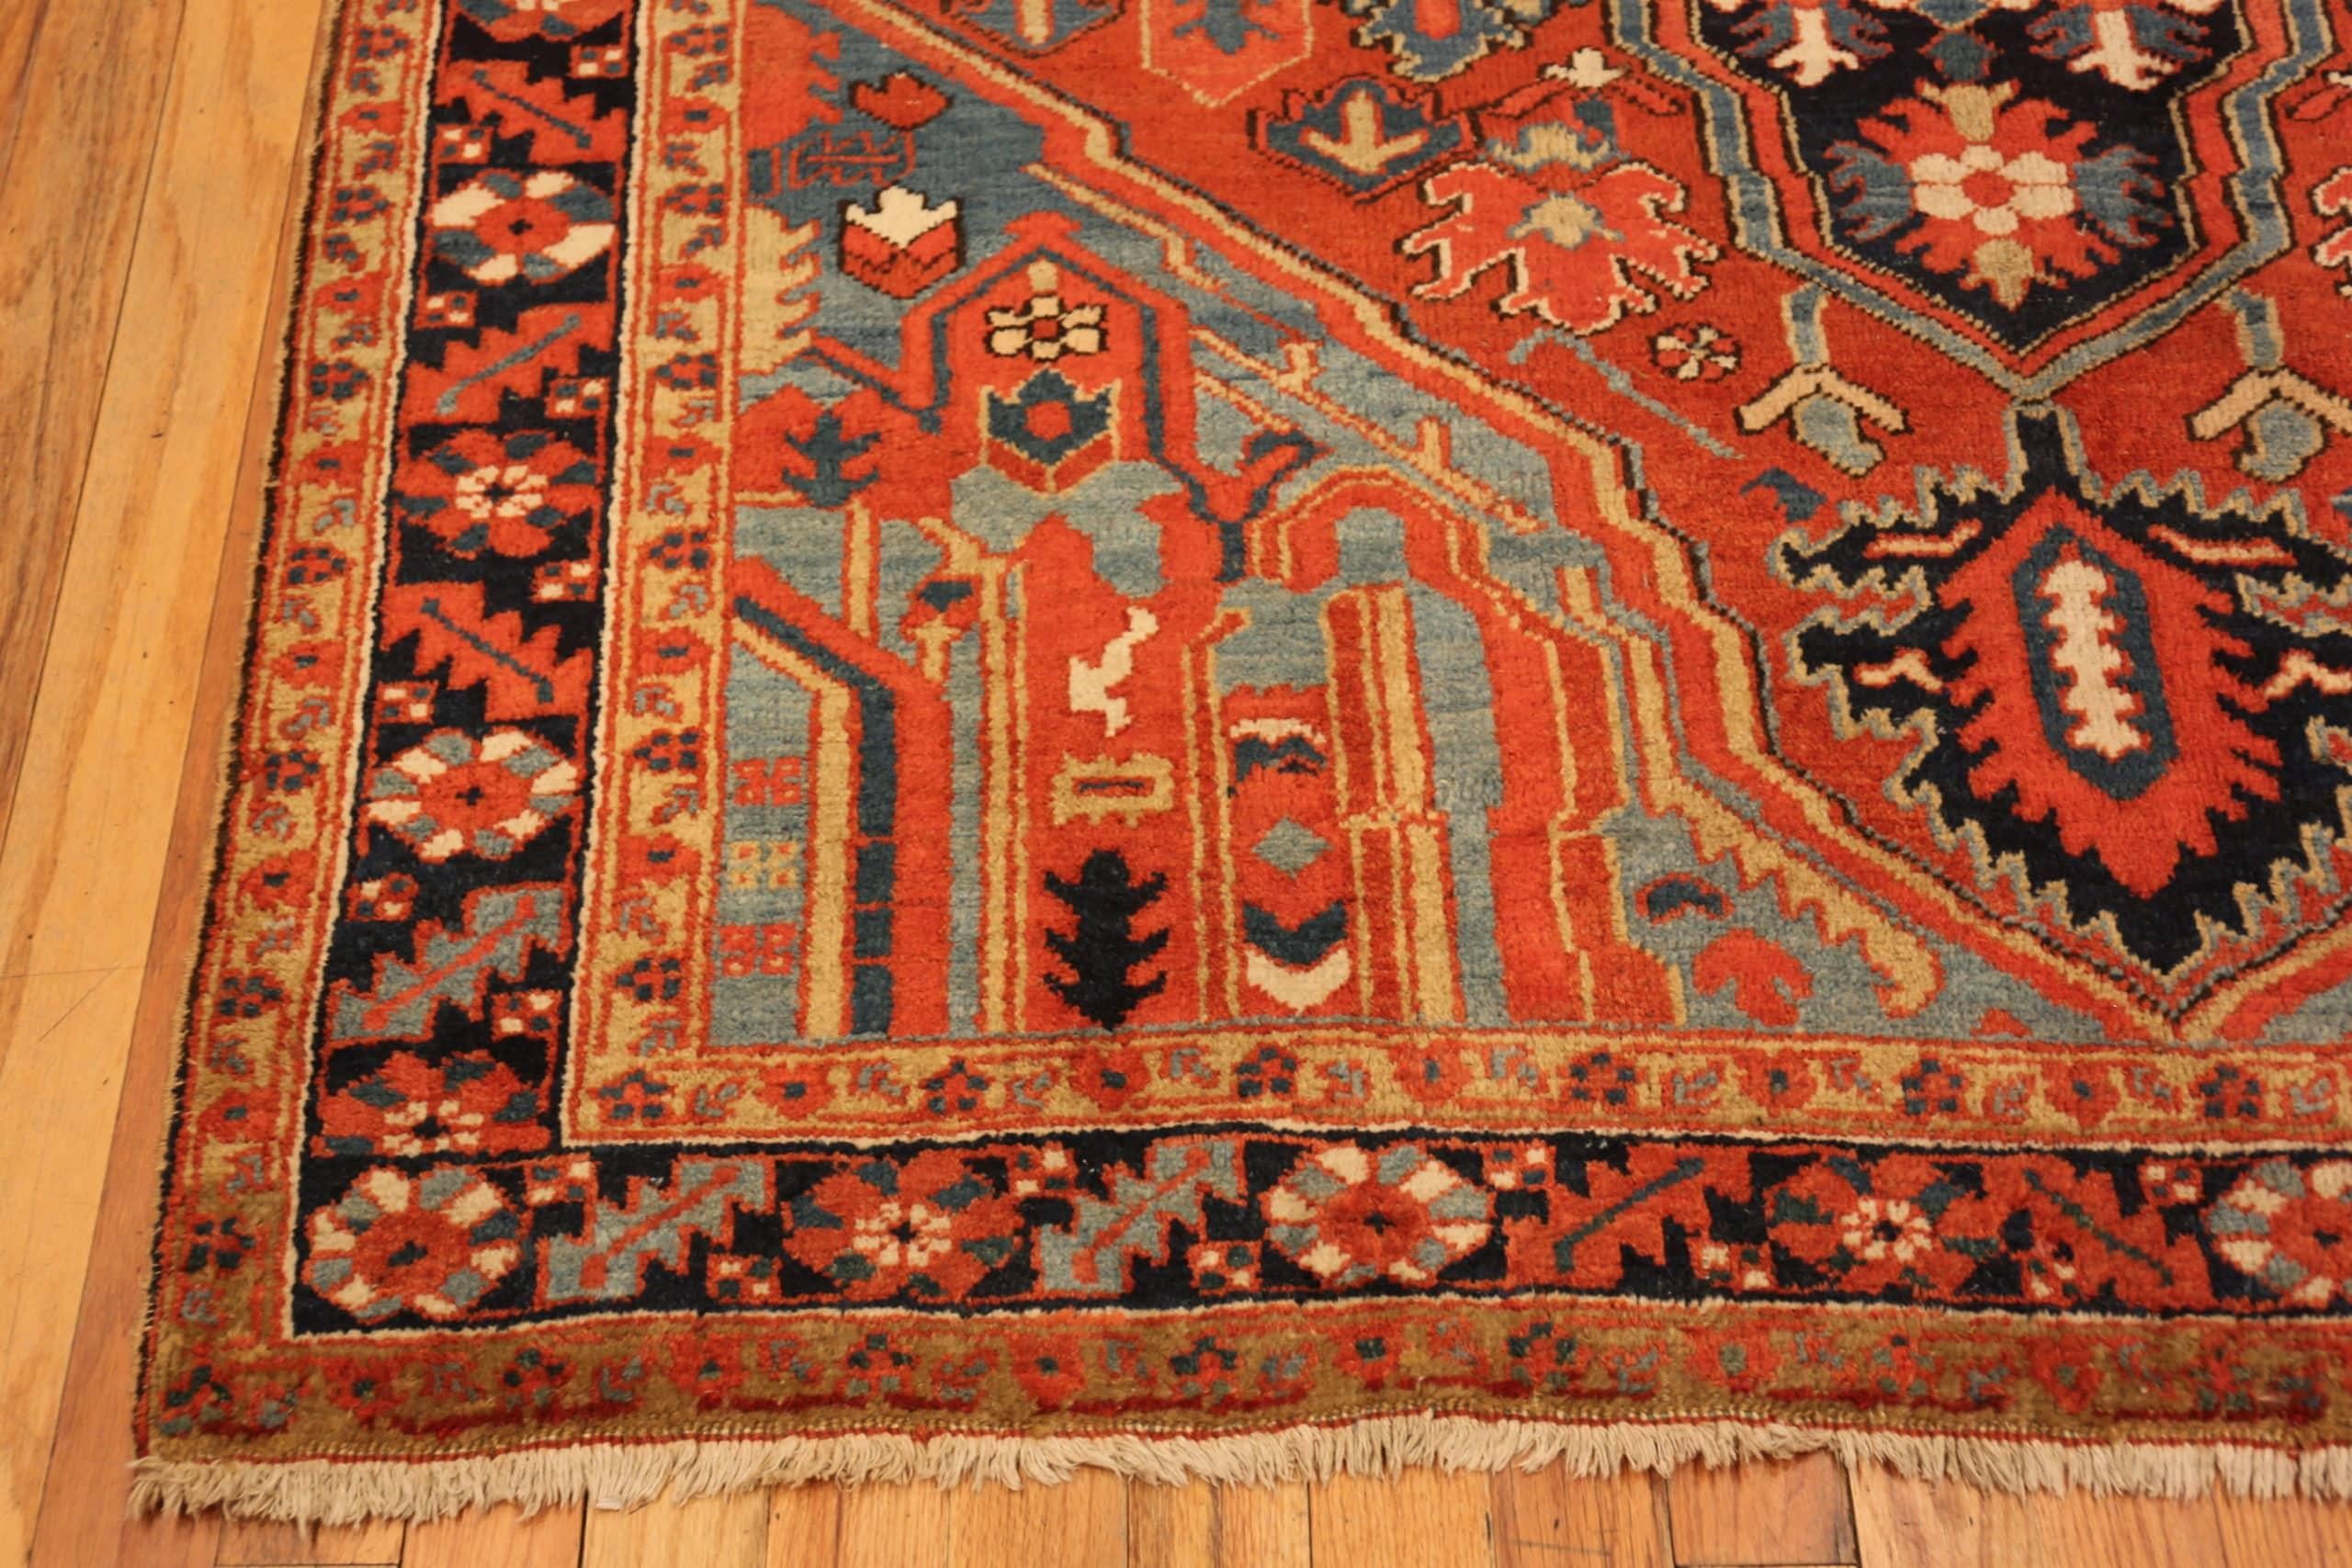 Small Antique Persian Heriz Rug, Country of Origin / rug type: Persian Rugs, Circa date: 1920. Size: 6 ft 5 in x 8 ft (1.96 m x 2.44 m)
 